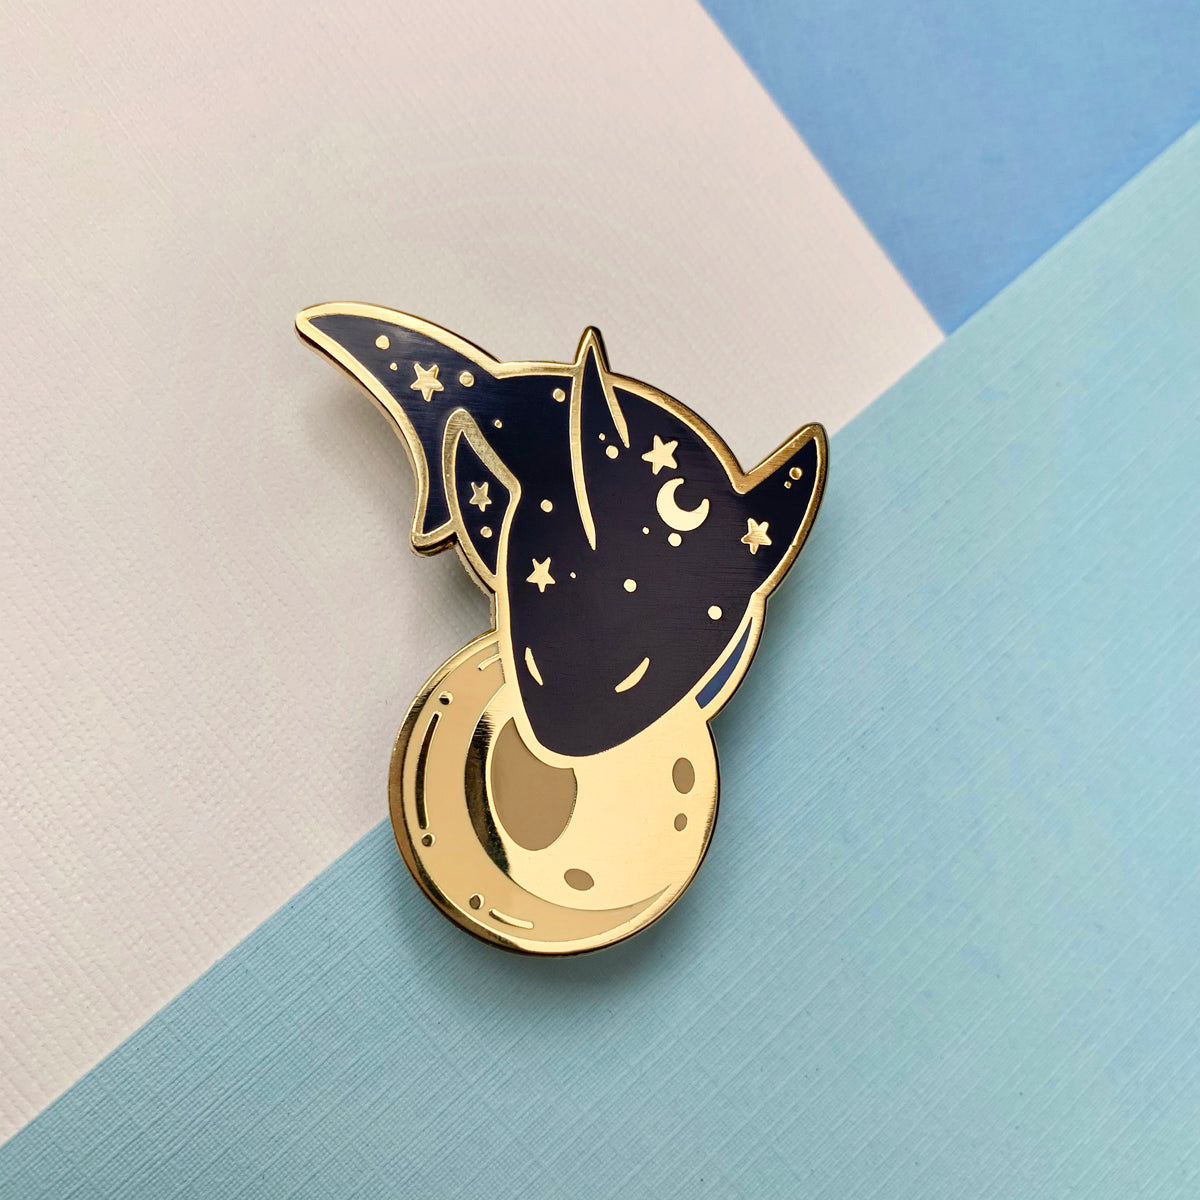 Starry Shark Enamel Pin by Shumi Collective